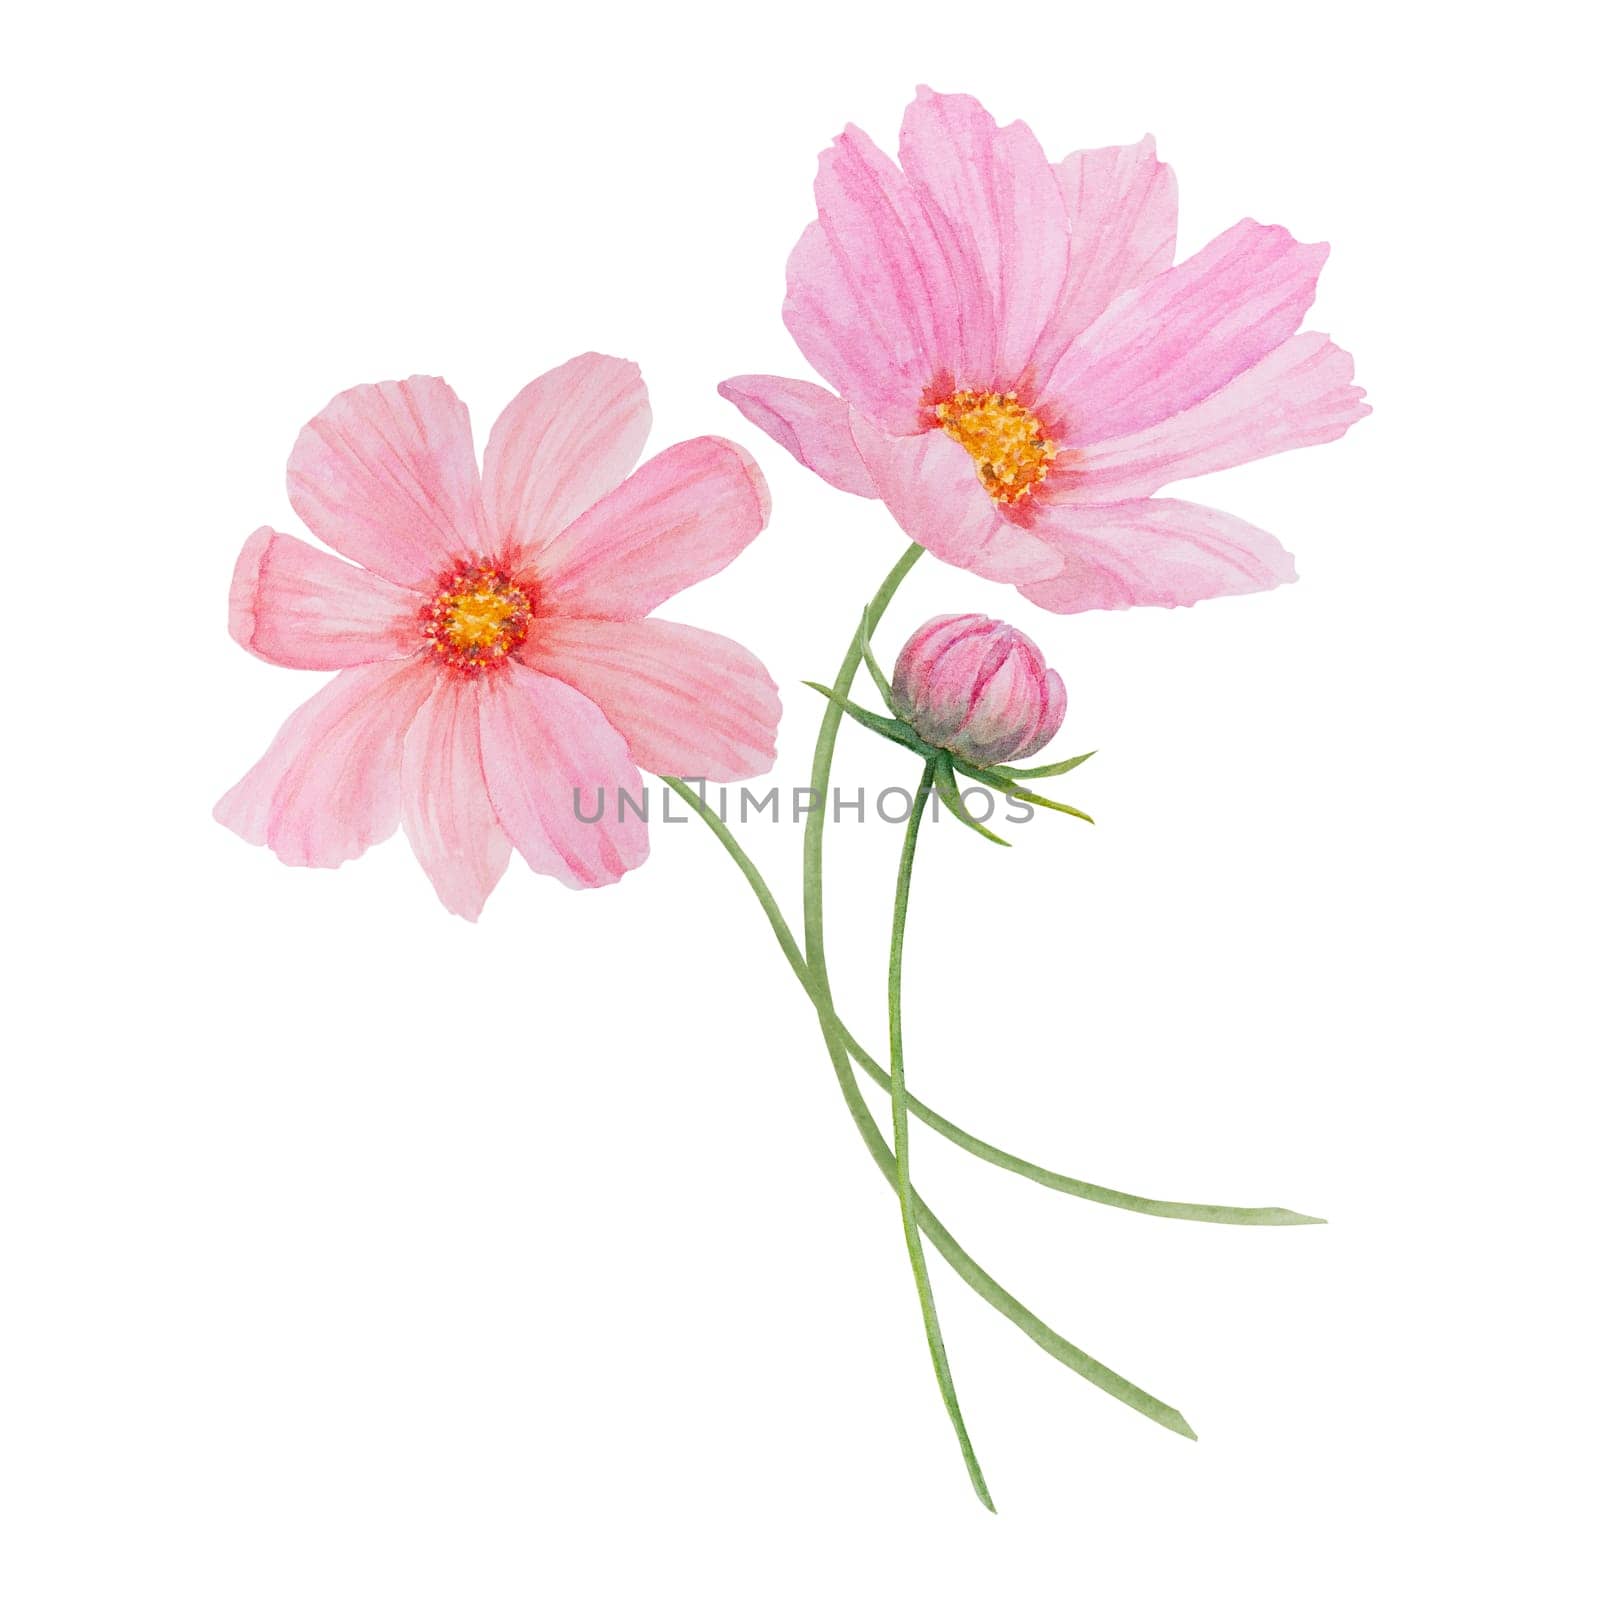 Garden pink Cosmos boquet watercolor illustration. Hand drawn botanical painting, floral sketch. Colorful preety flower clipart for summer or autumn design of wedding invitation, prints, greetings, sublimation, textile